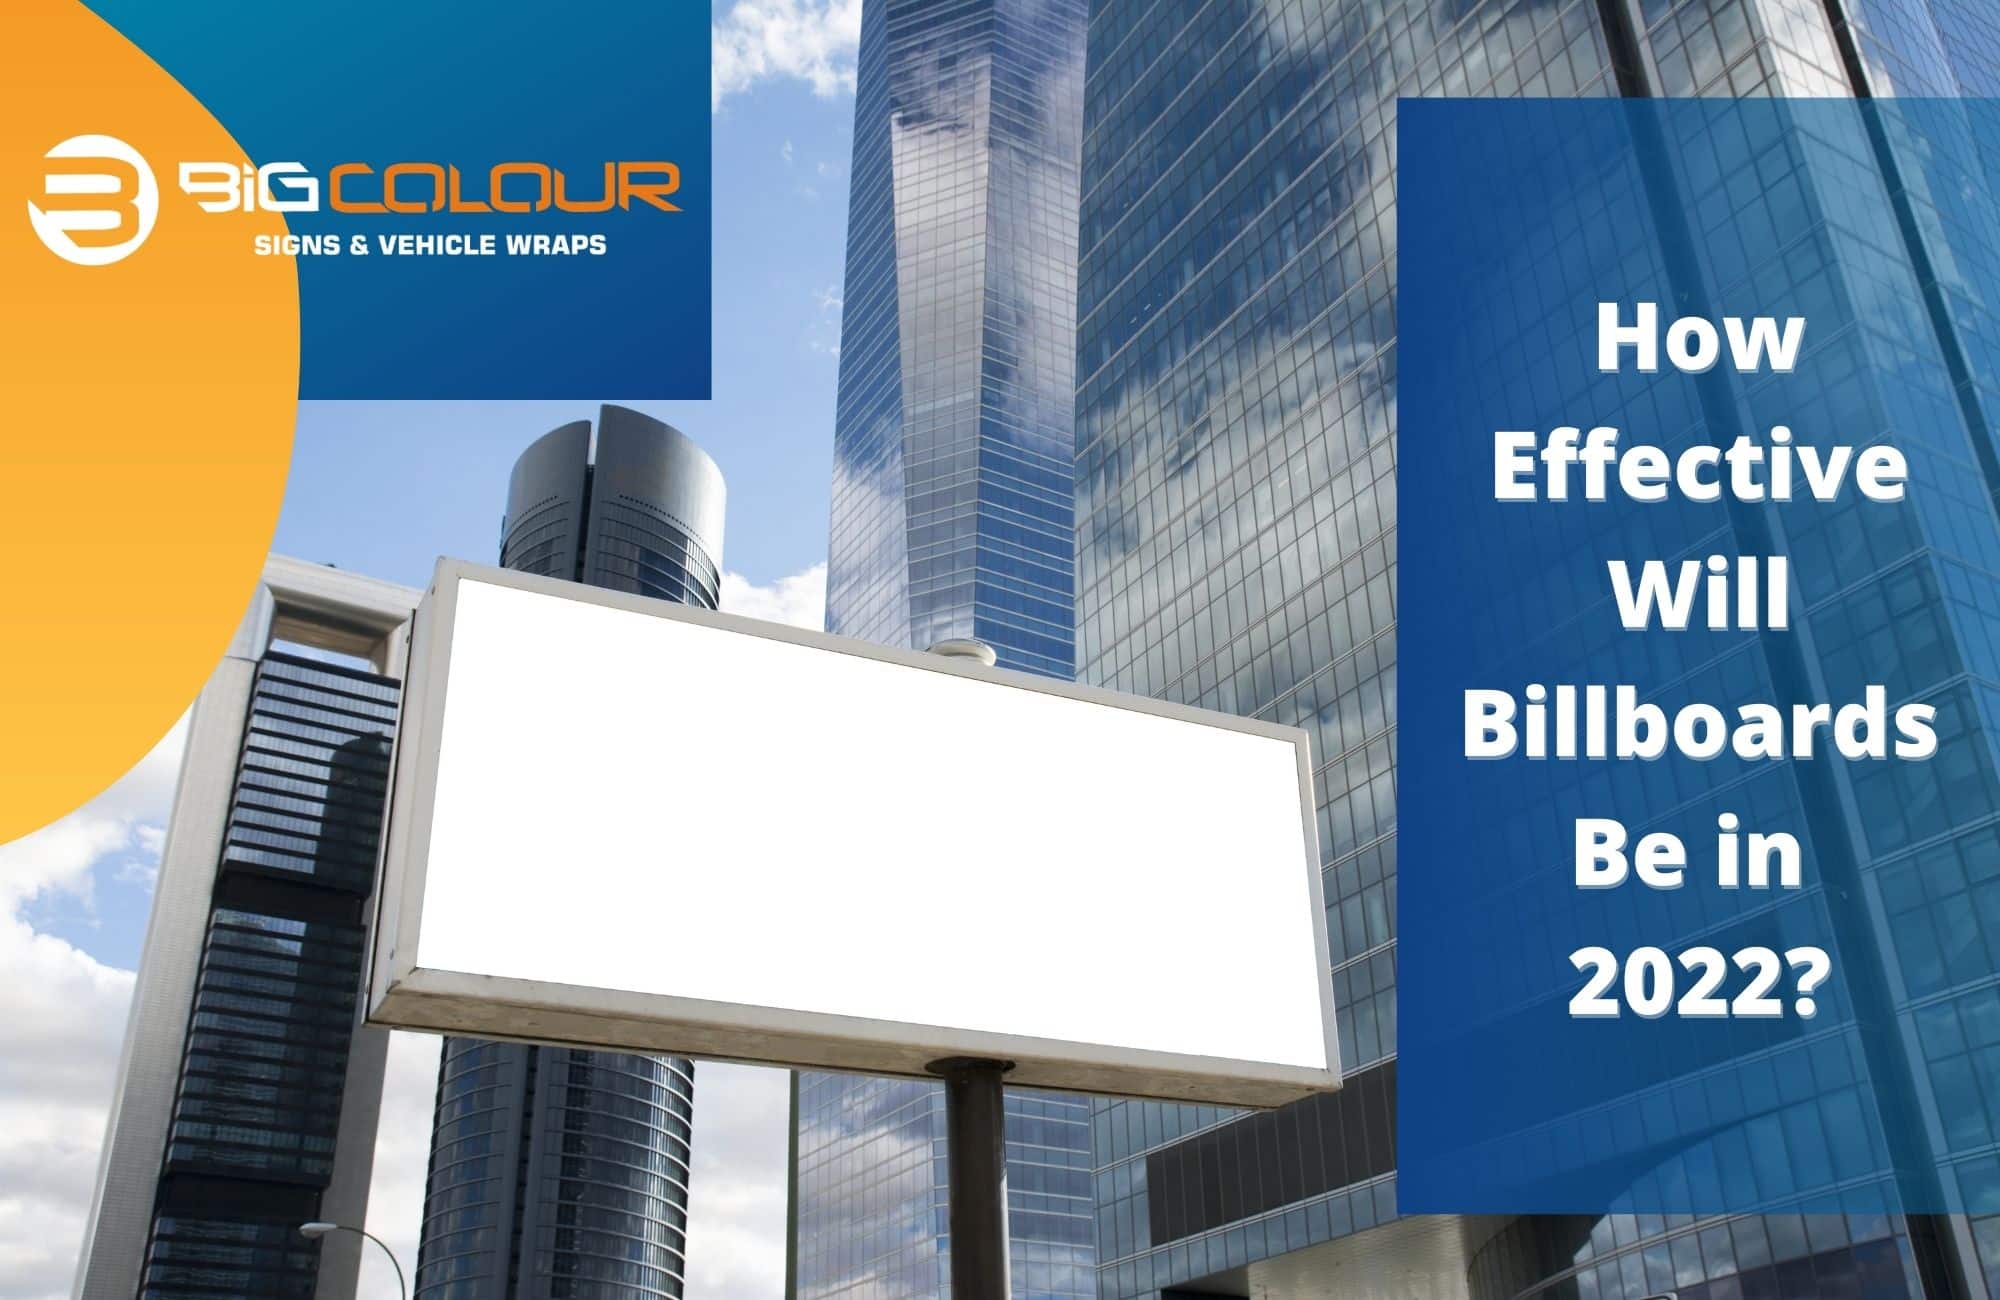 How Effective Will Billboards Be in 2022?